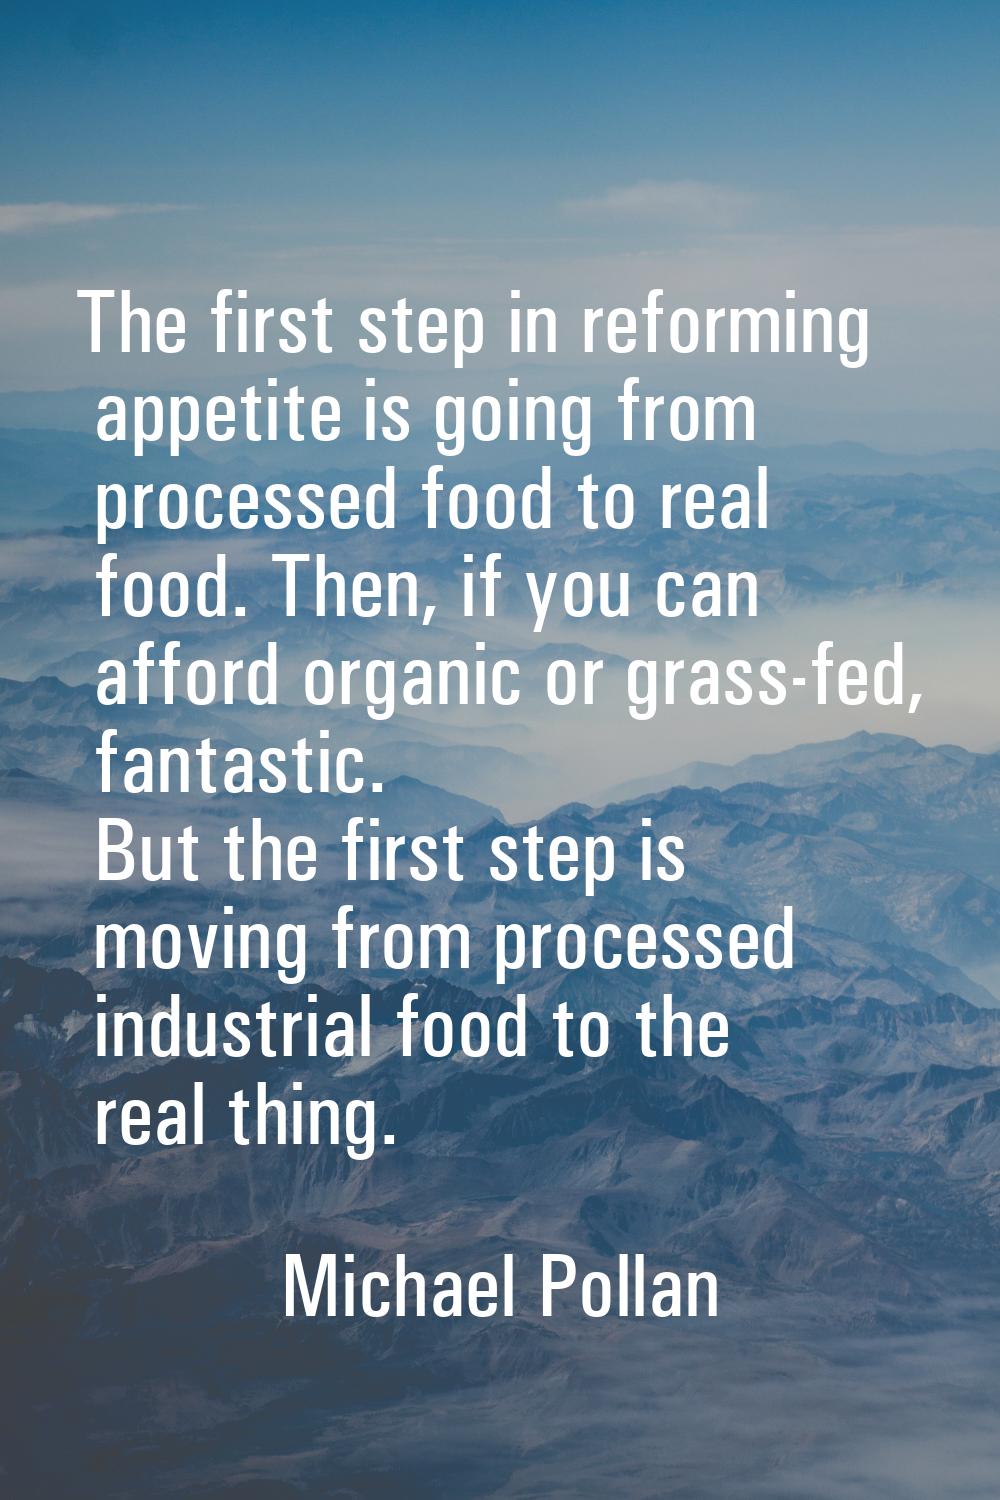 The first step in reforming appetite is going from processed food to real food. Then, if you can af